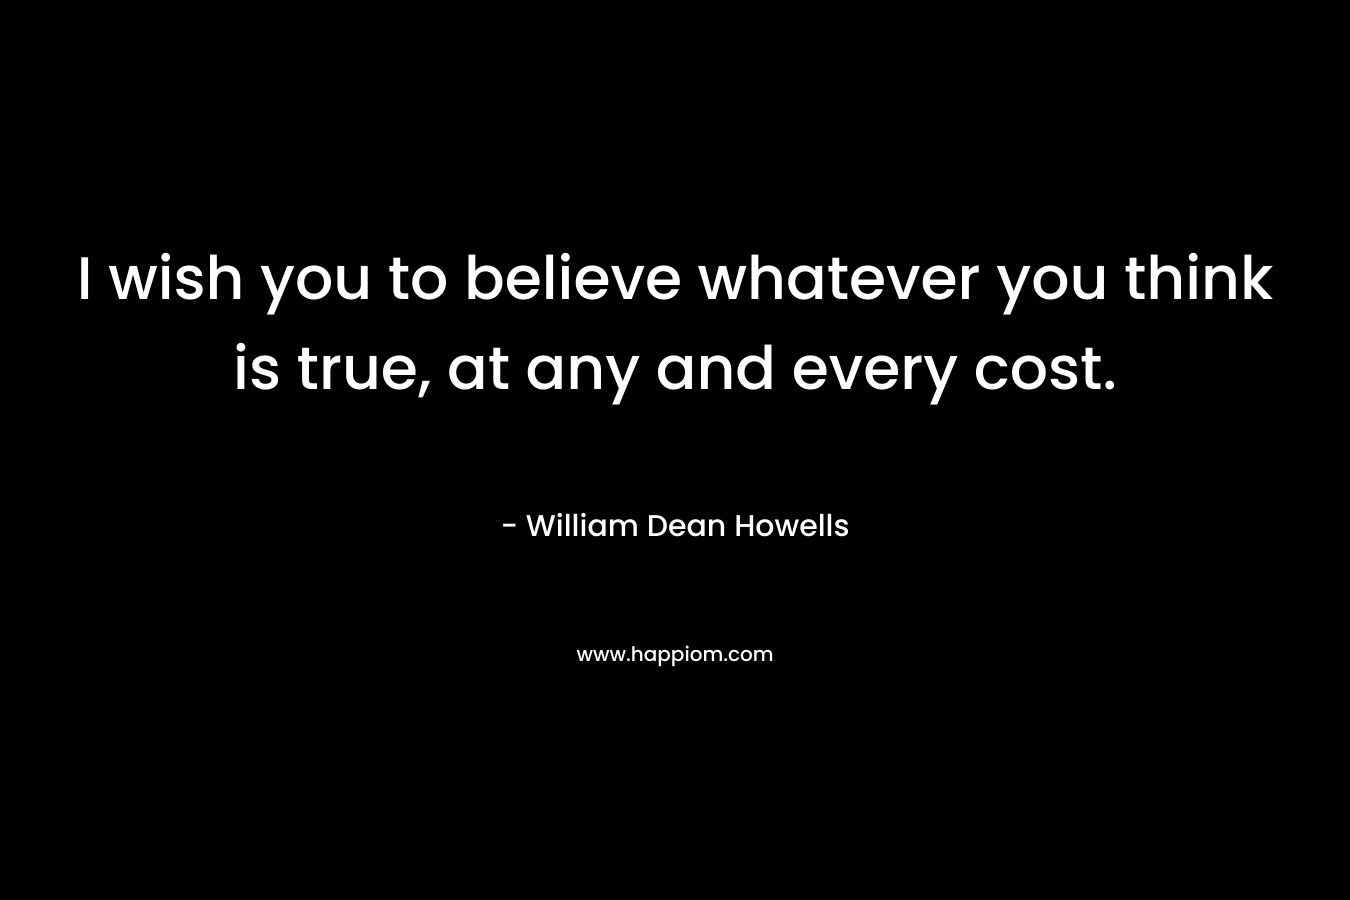 I wish you to believe whatever you think is true, at any and every cost. – William Dean Howells